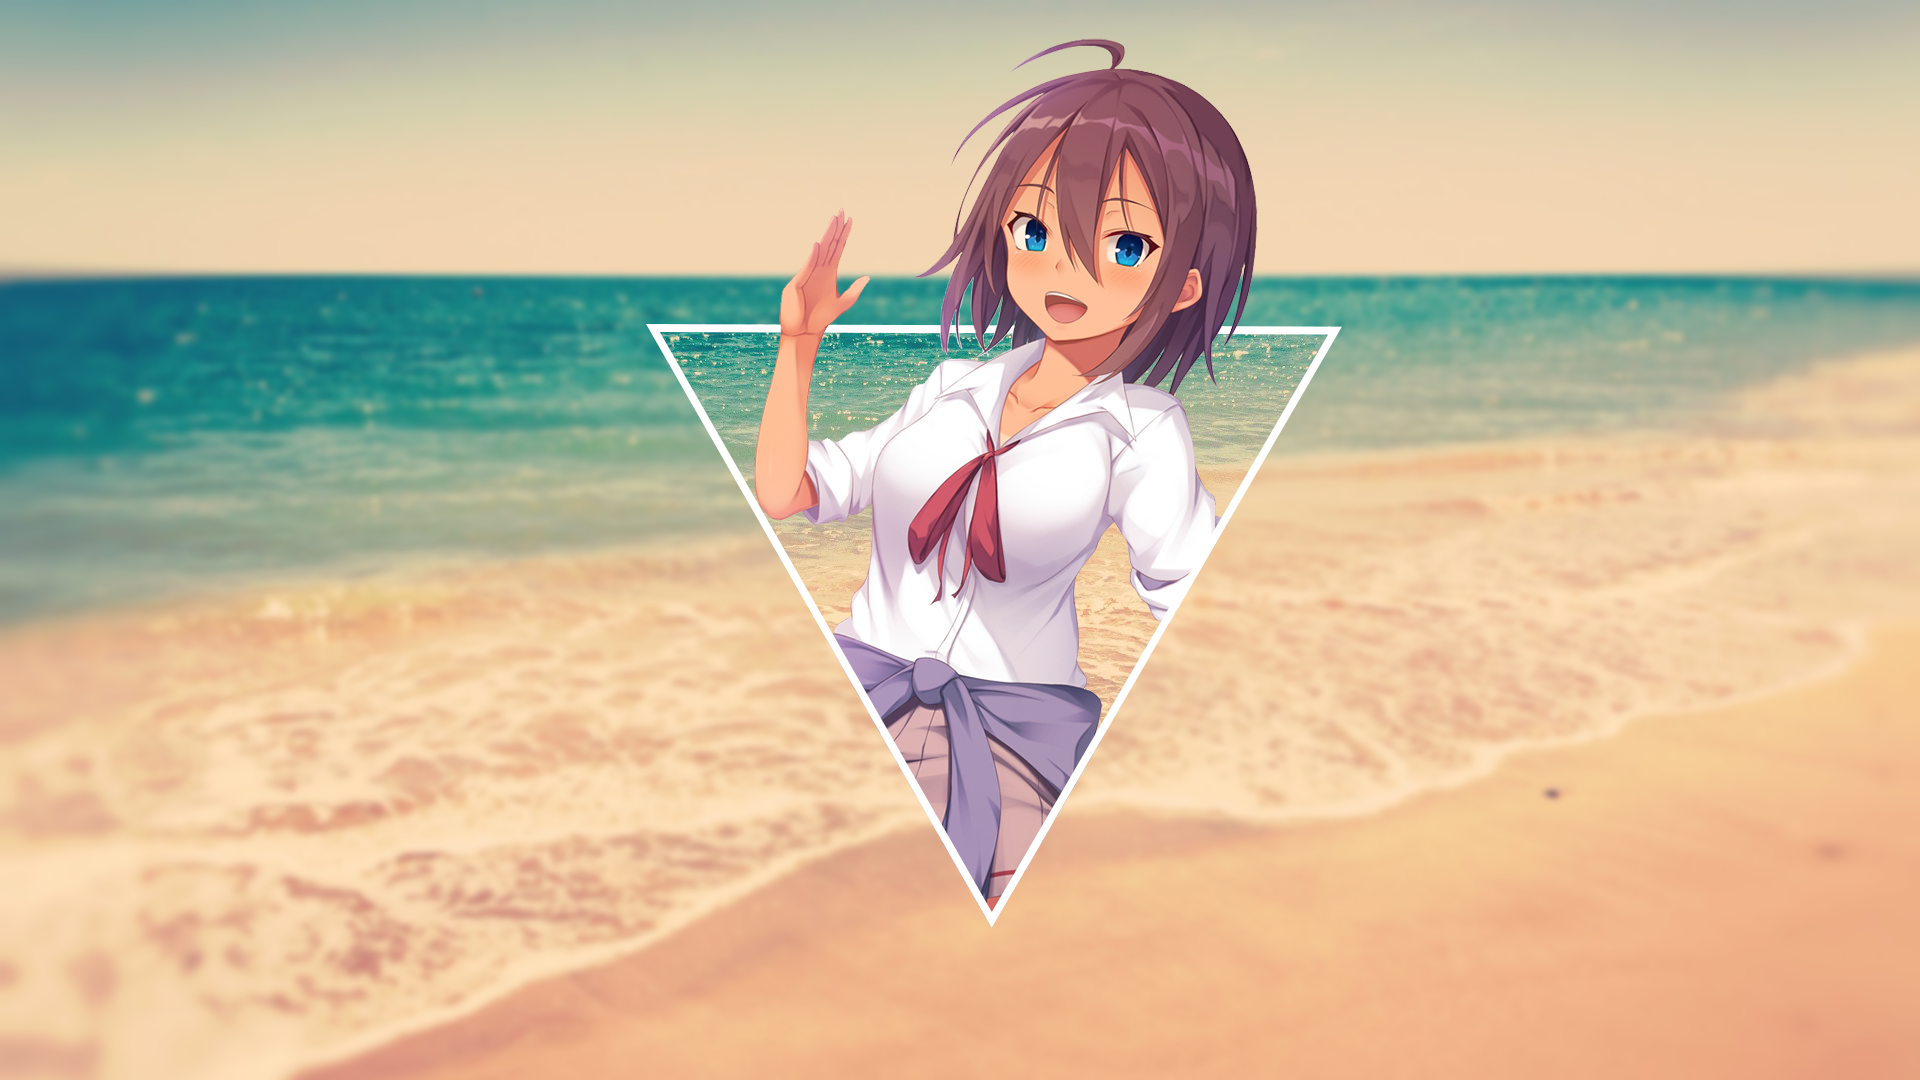 Anime Render In Shapes Anime Girls Beach Blue Eyes Open Mouth Picture In Picture 1920x1080